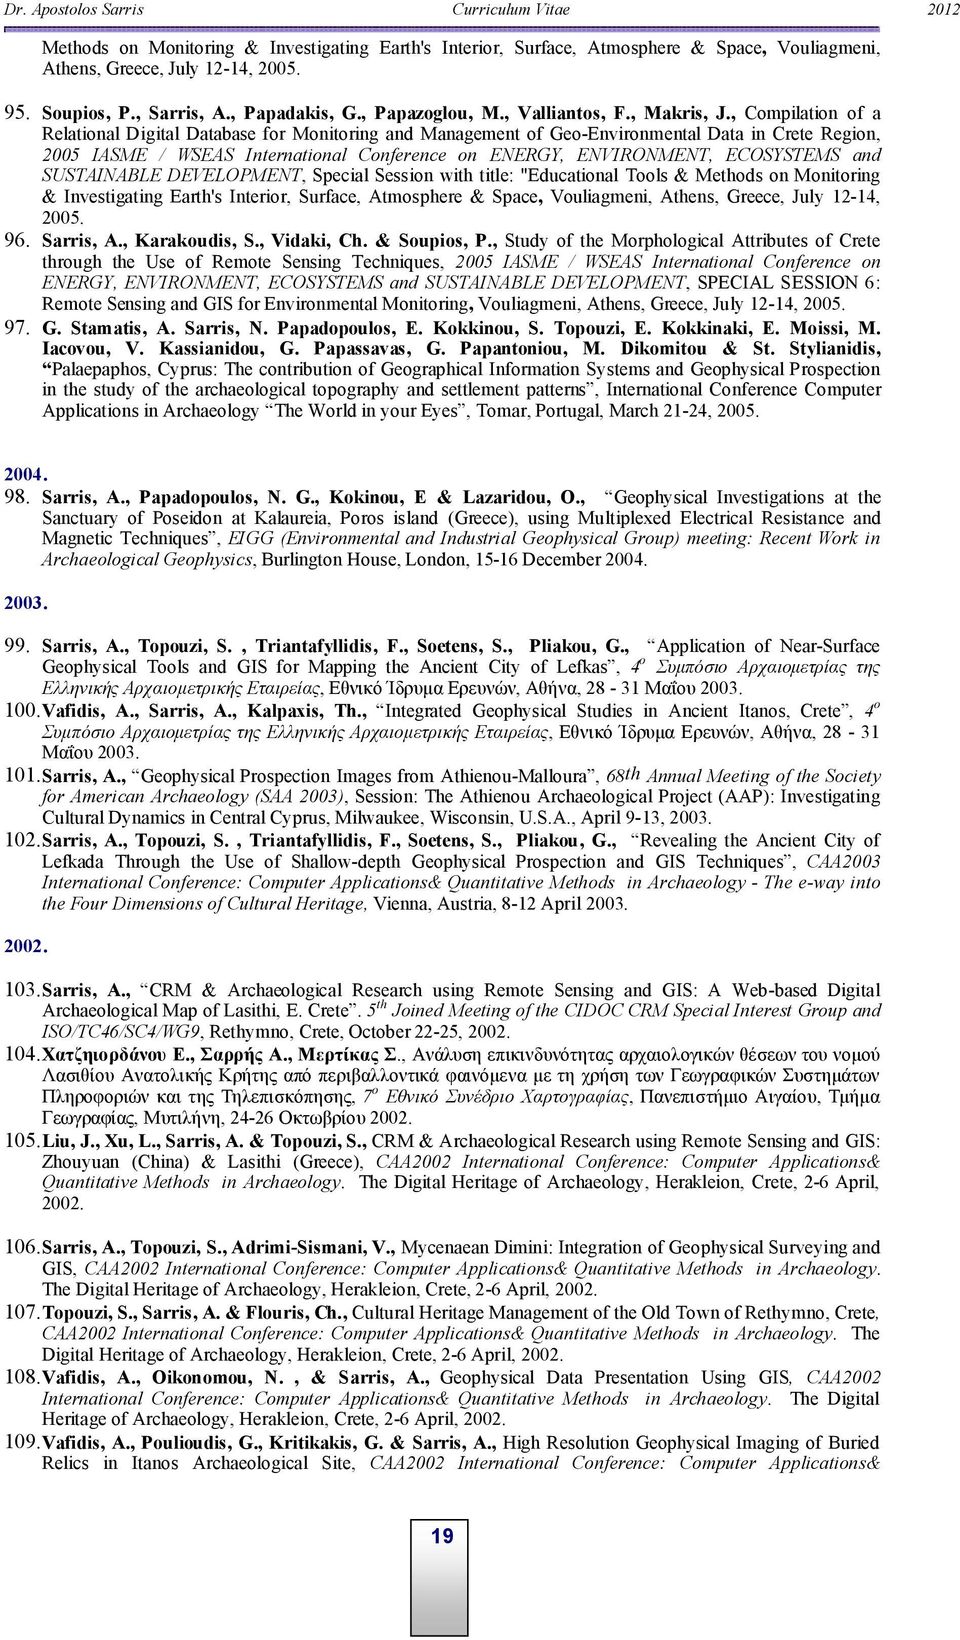 , Compilation of a Relational Digital Database for Monitoring and Management of Geo-Environmental Data in Crete Region, 2005 IASME / WSEAS International Conference on ENERGY, ENVIRONMENT, ECOSYSTEMS